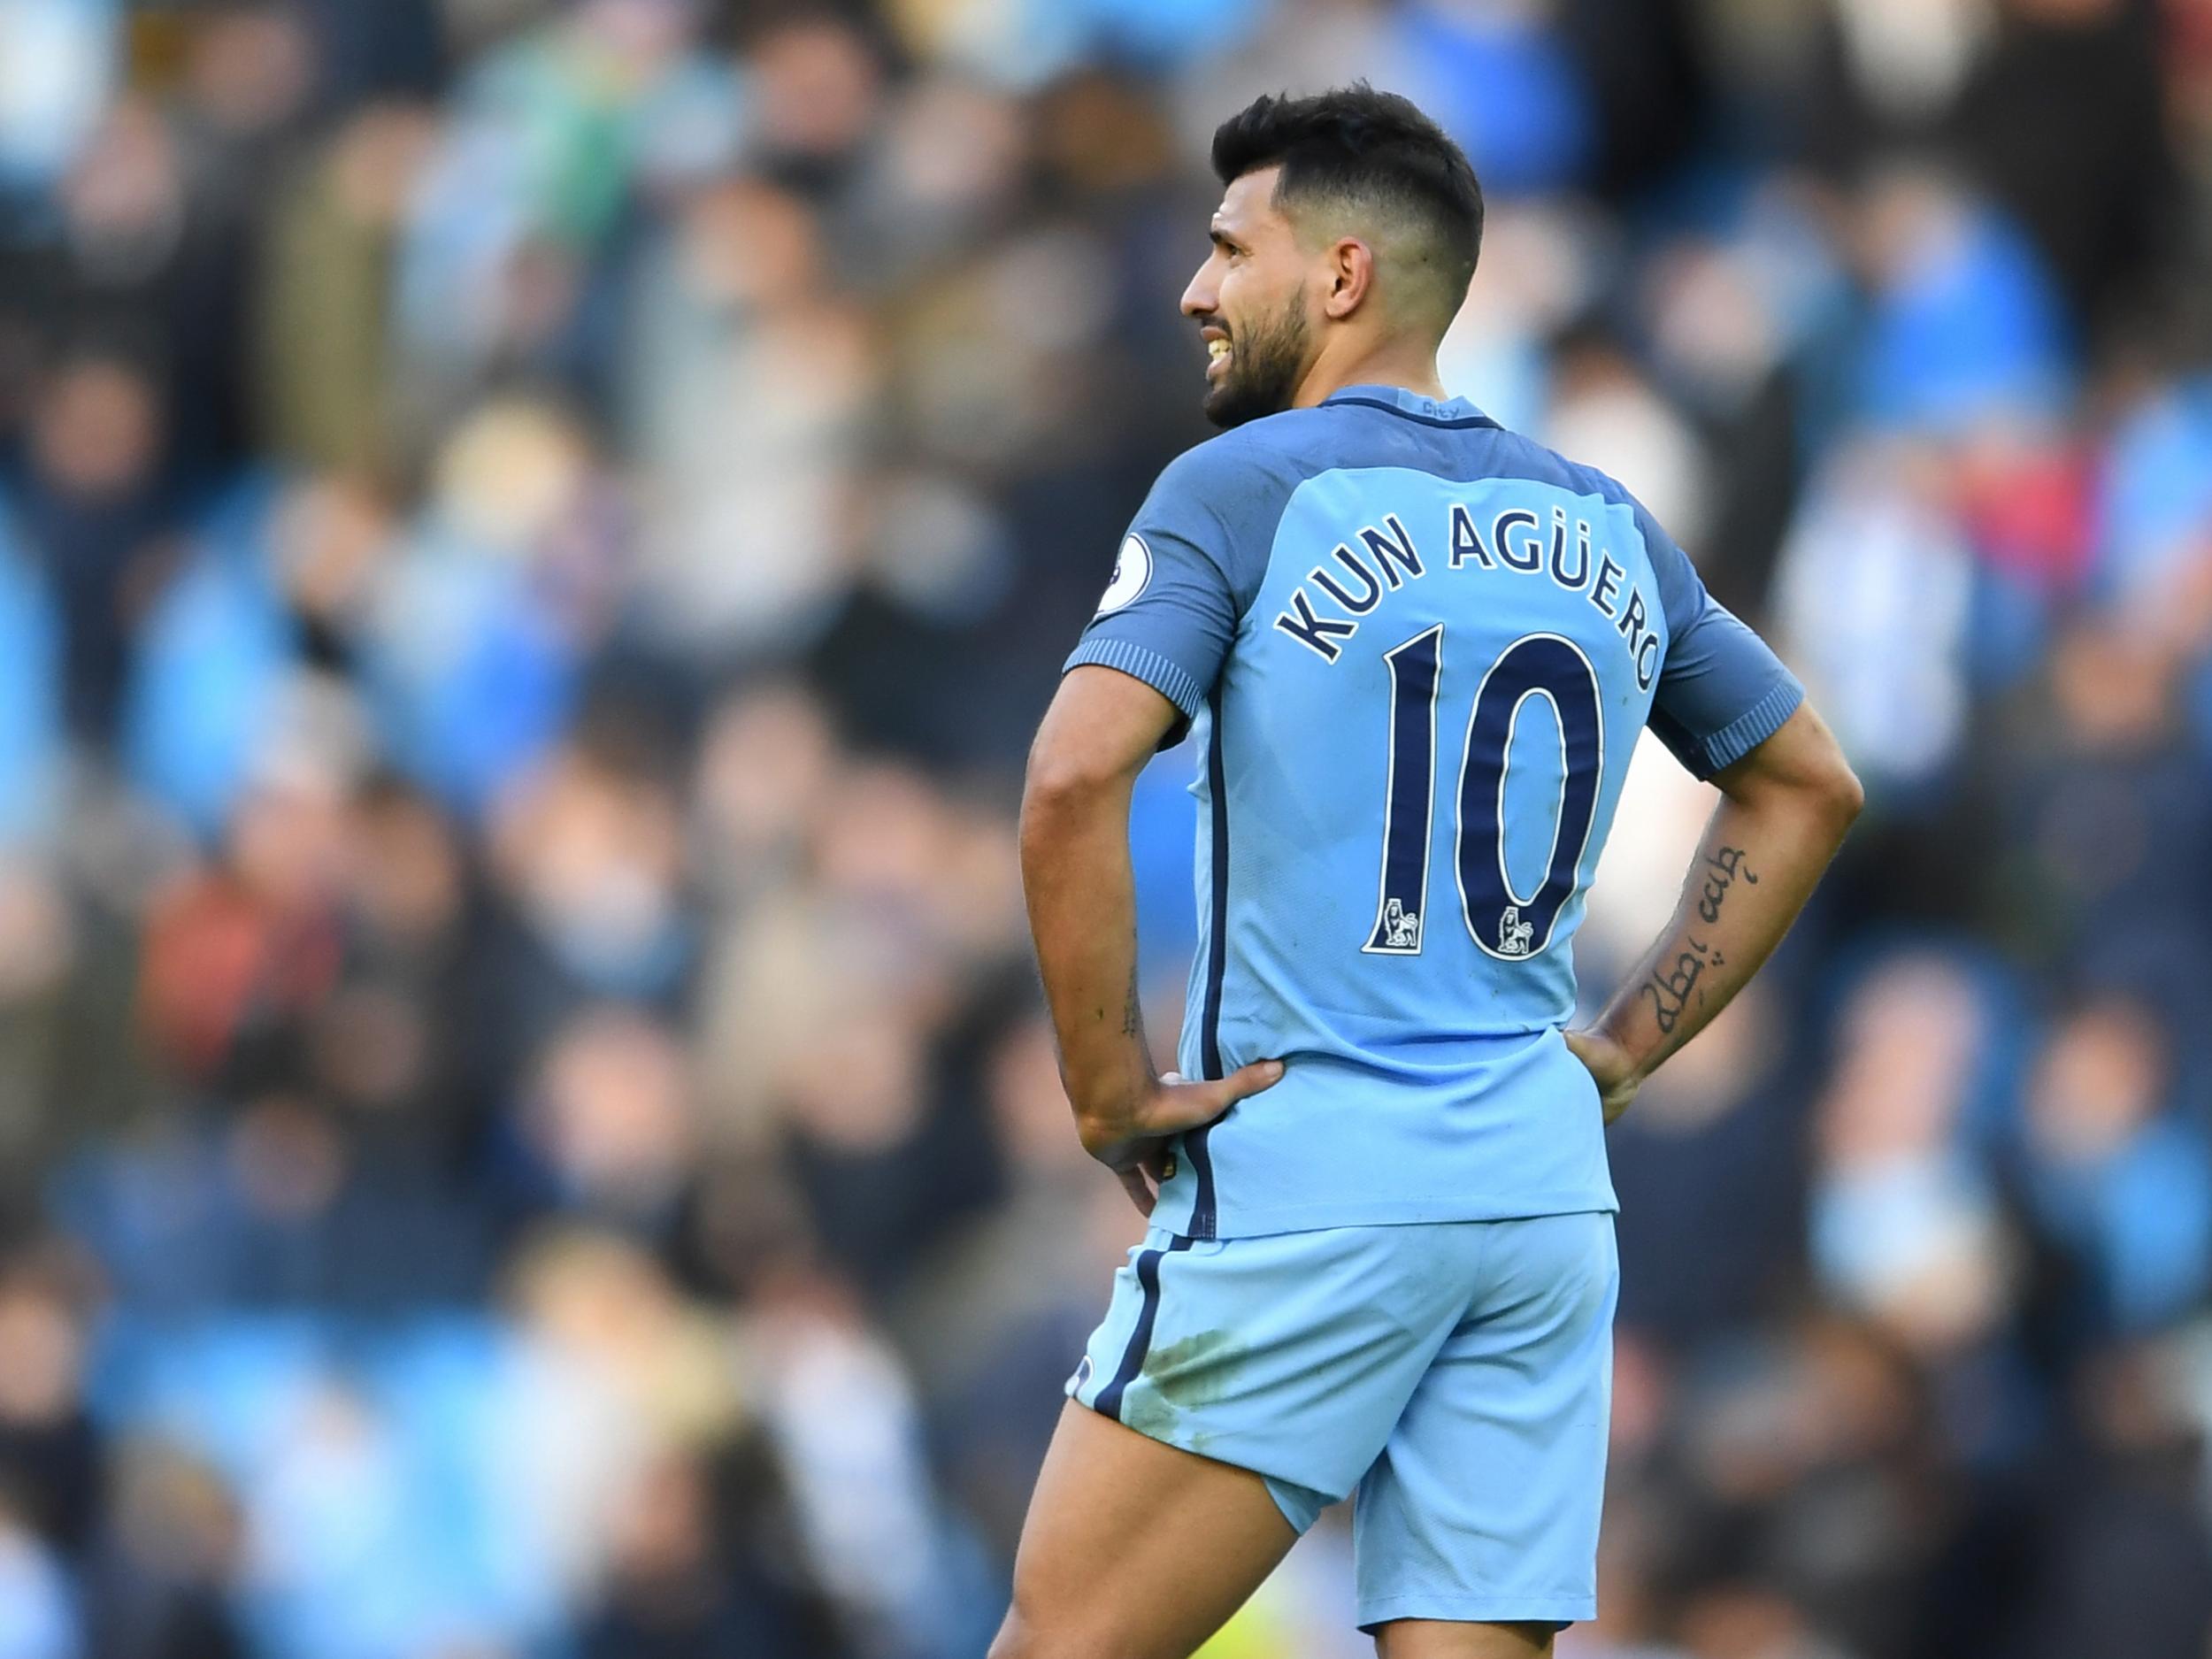 Aguero was largely anonymous on his return to the side (Getty)